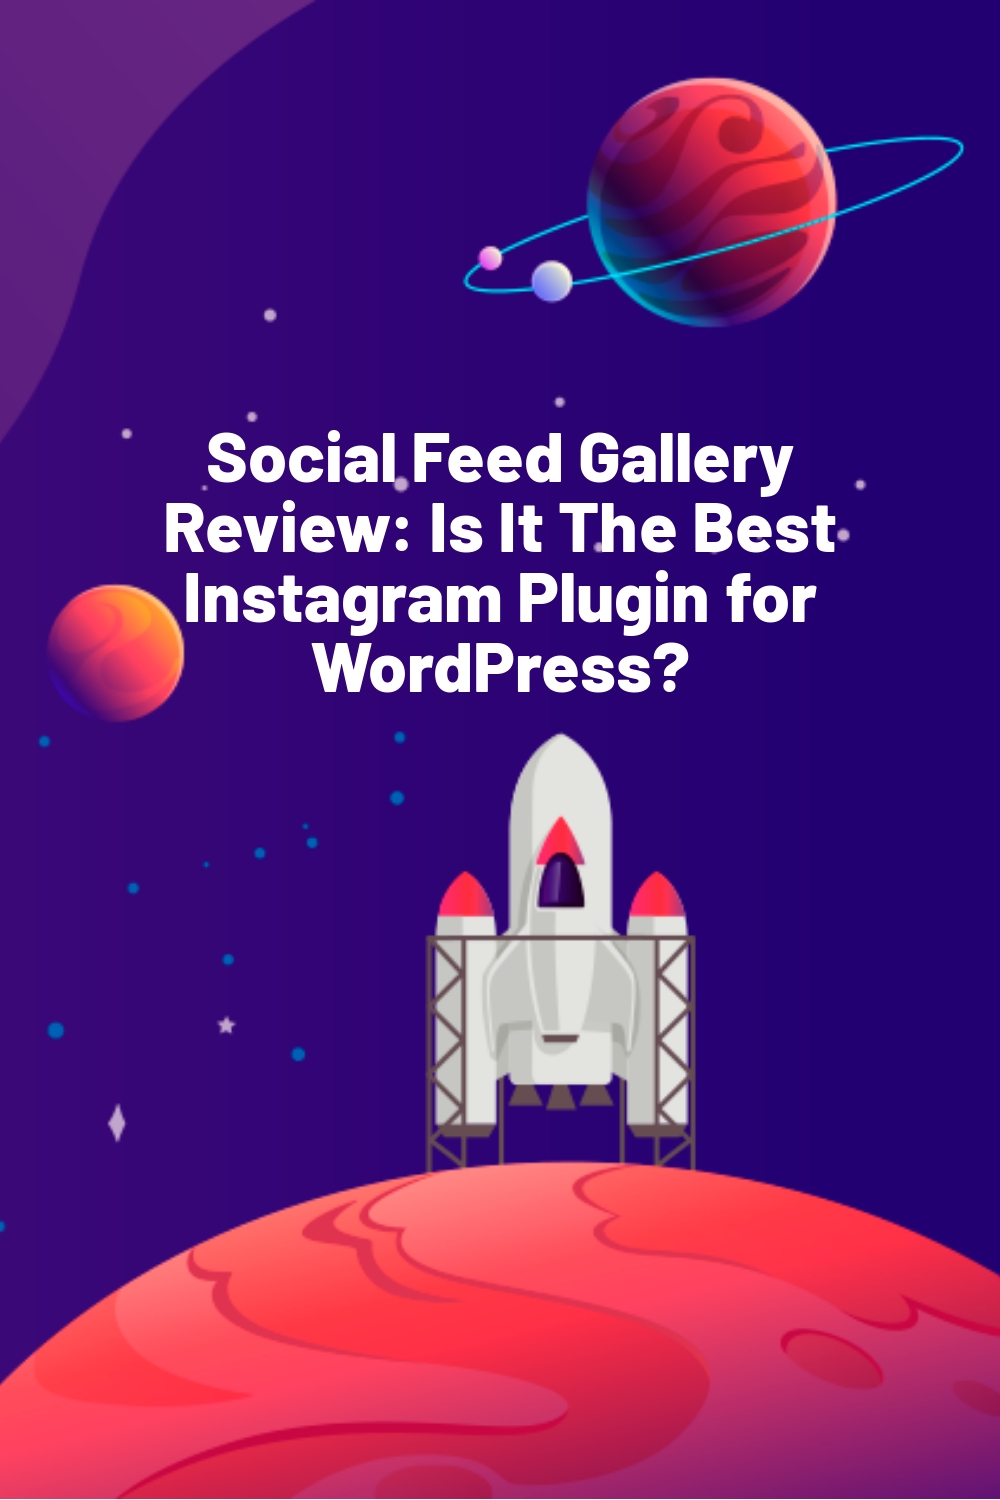 Social Feed Gallery Review: Is It The Best Instagram Plugin for WordPress?